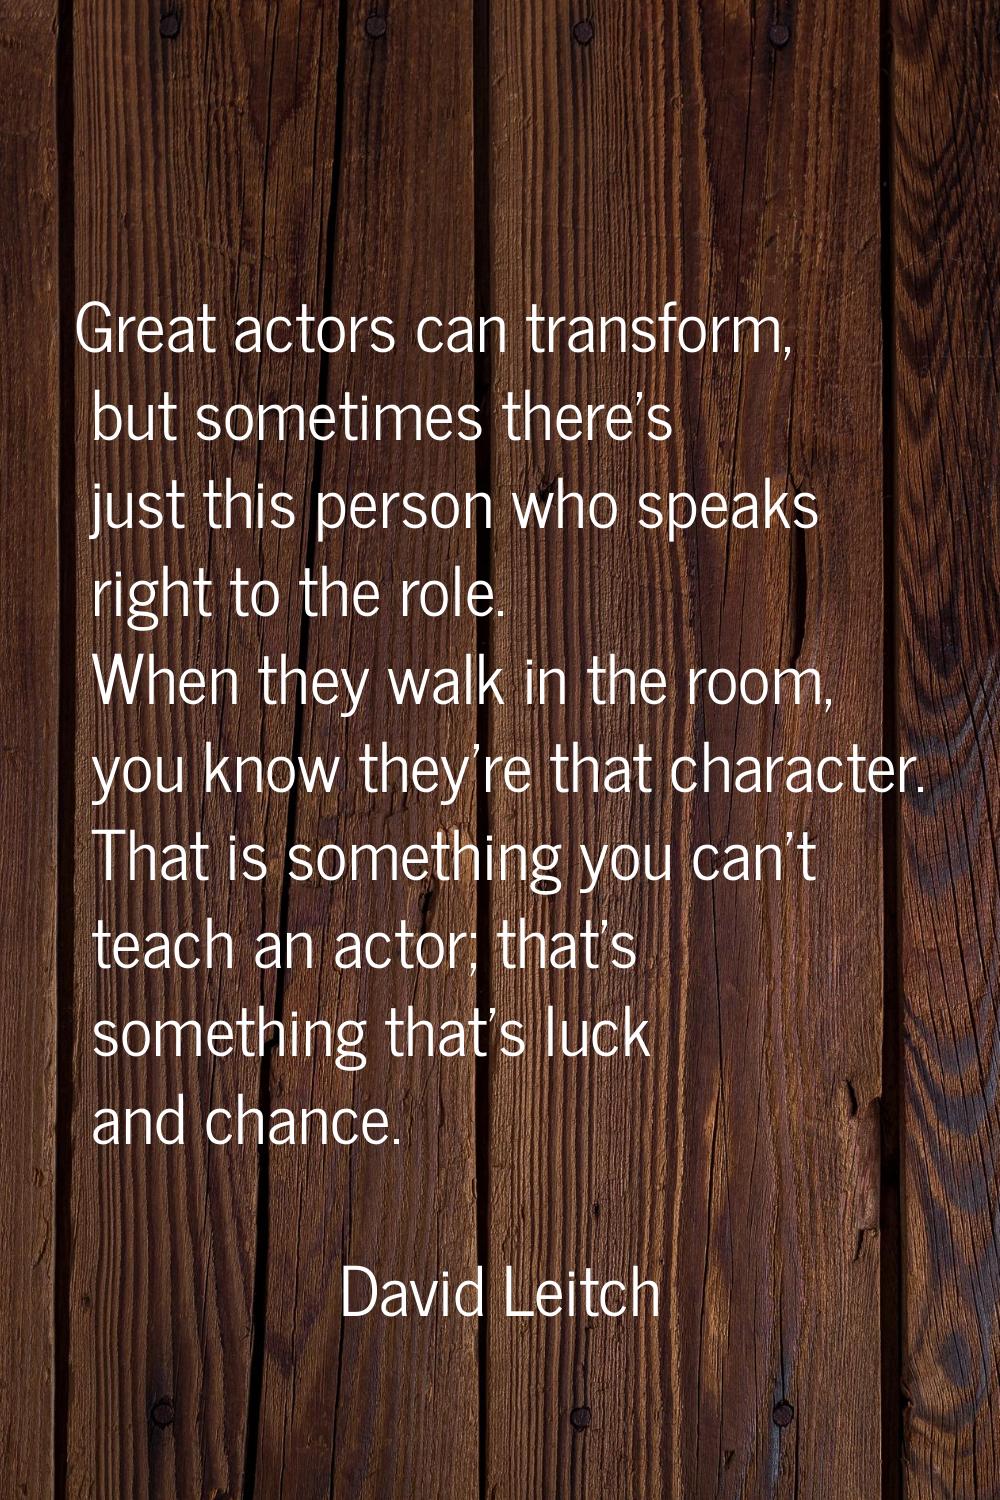 Great actors can transform, but sometimes there's just this person who speaks right to the role. Wh